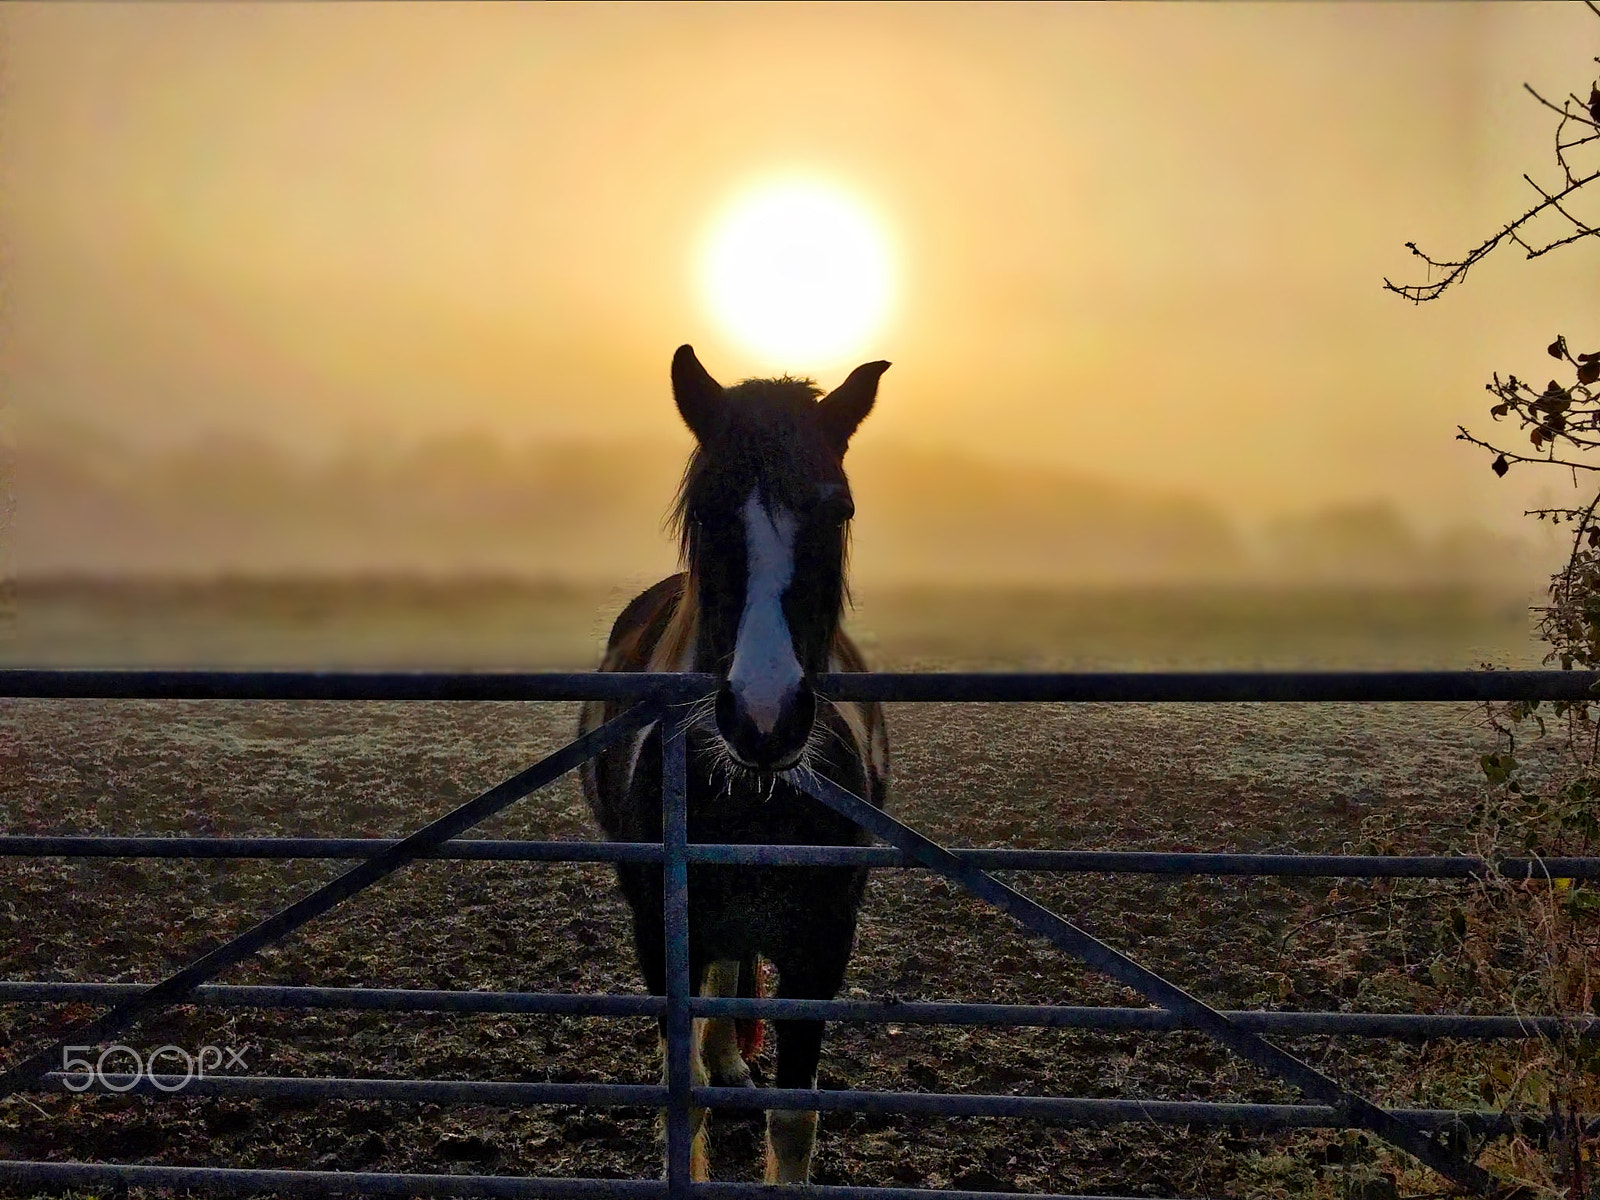 Apple iPhone sample photo. Horse during the golden hour by a gateway photography